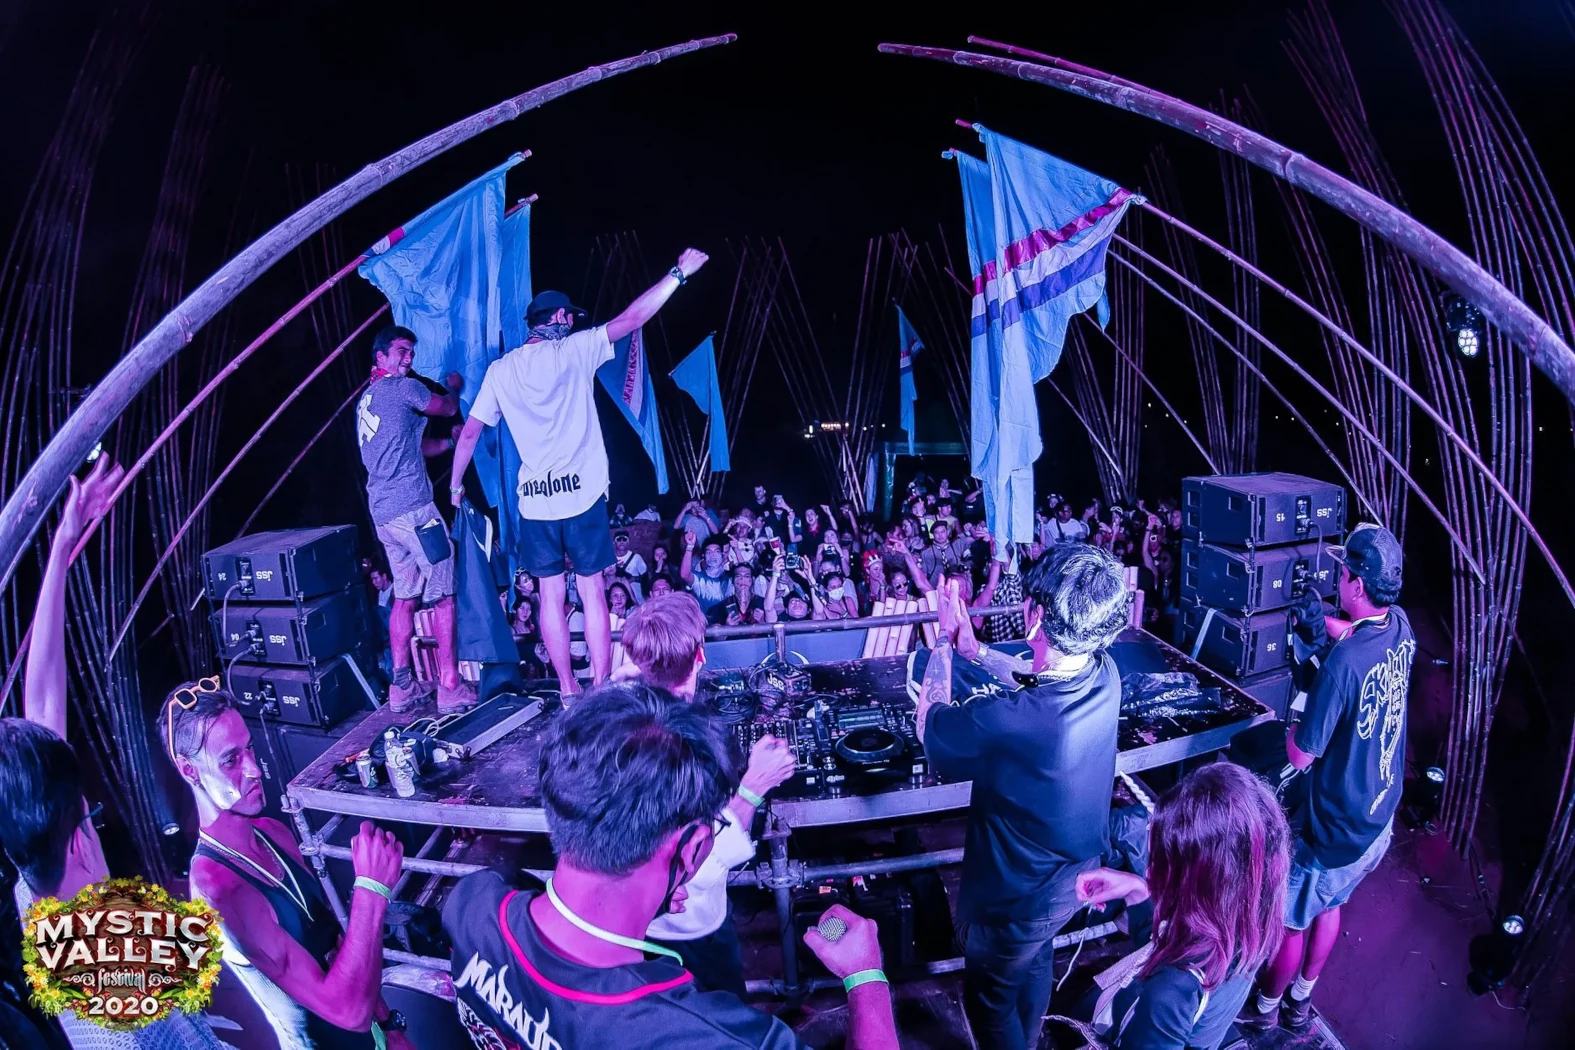 A super cool DJ set at the Mystic Valley Music Festival in Thailand.